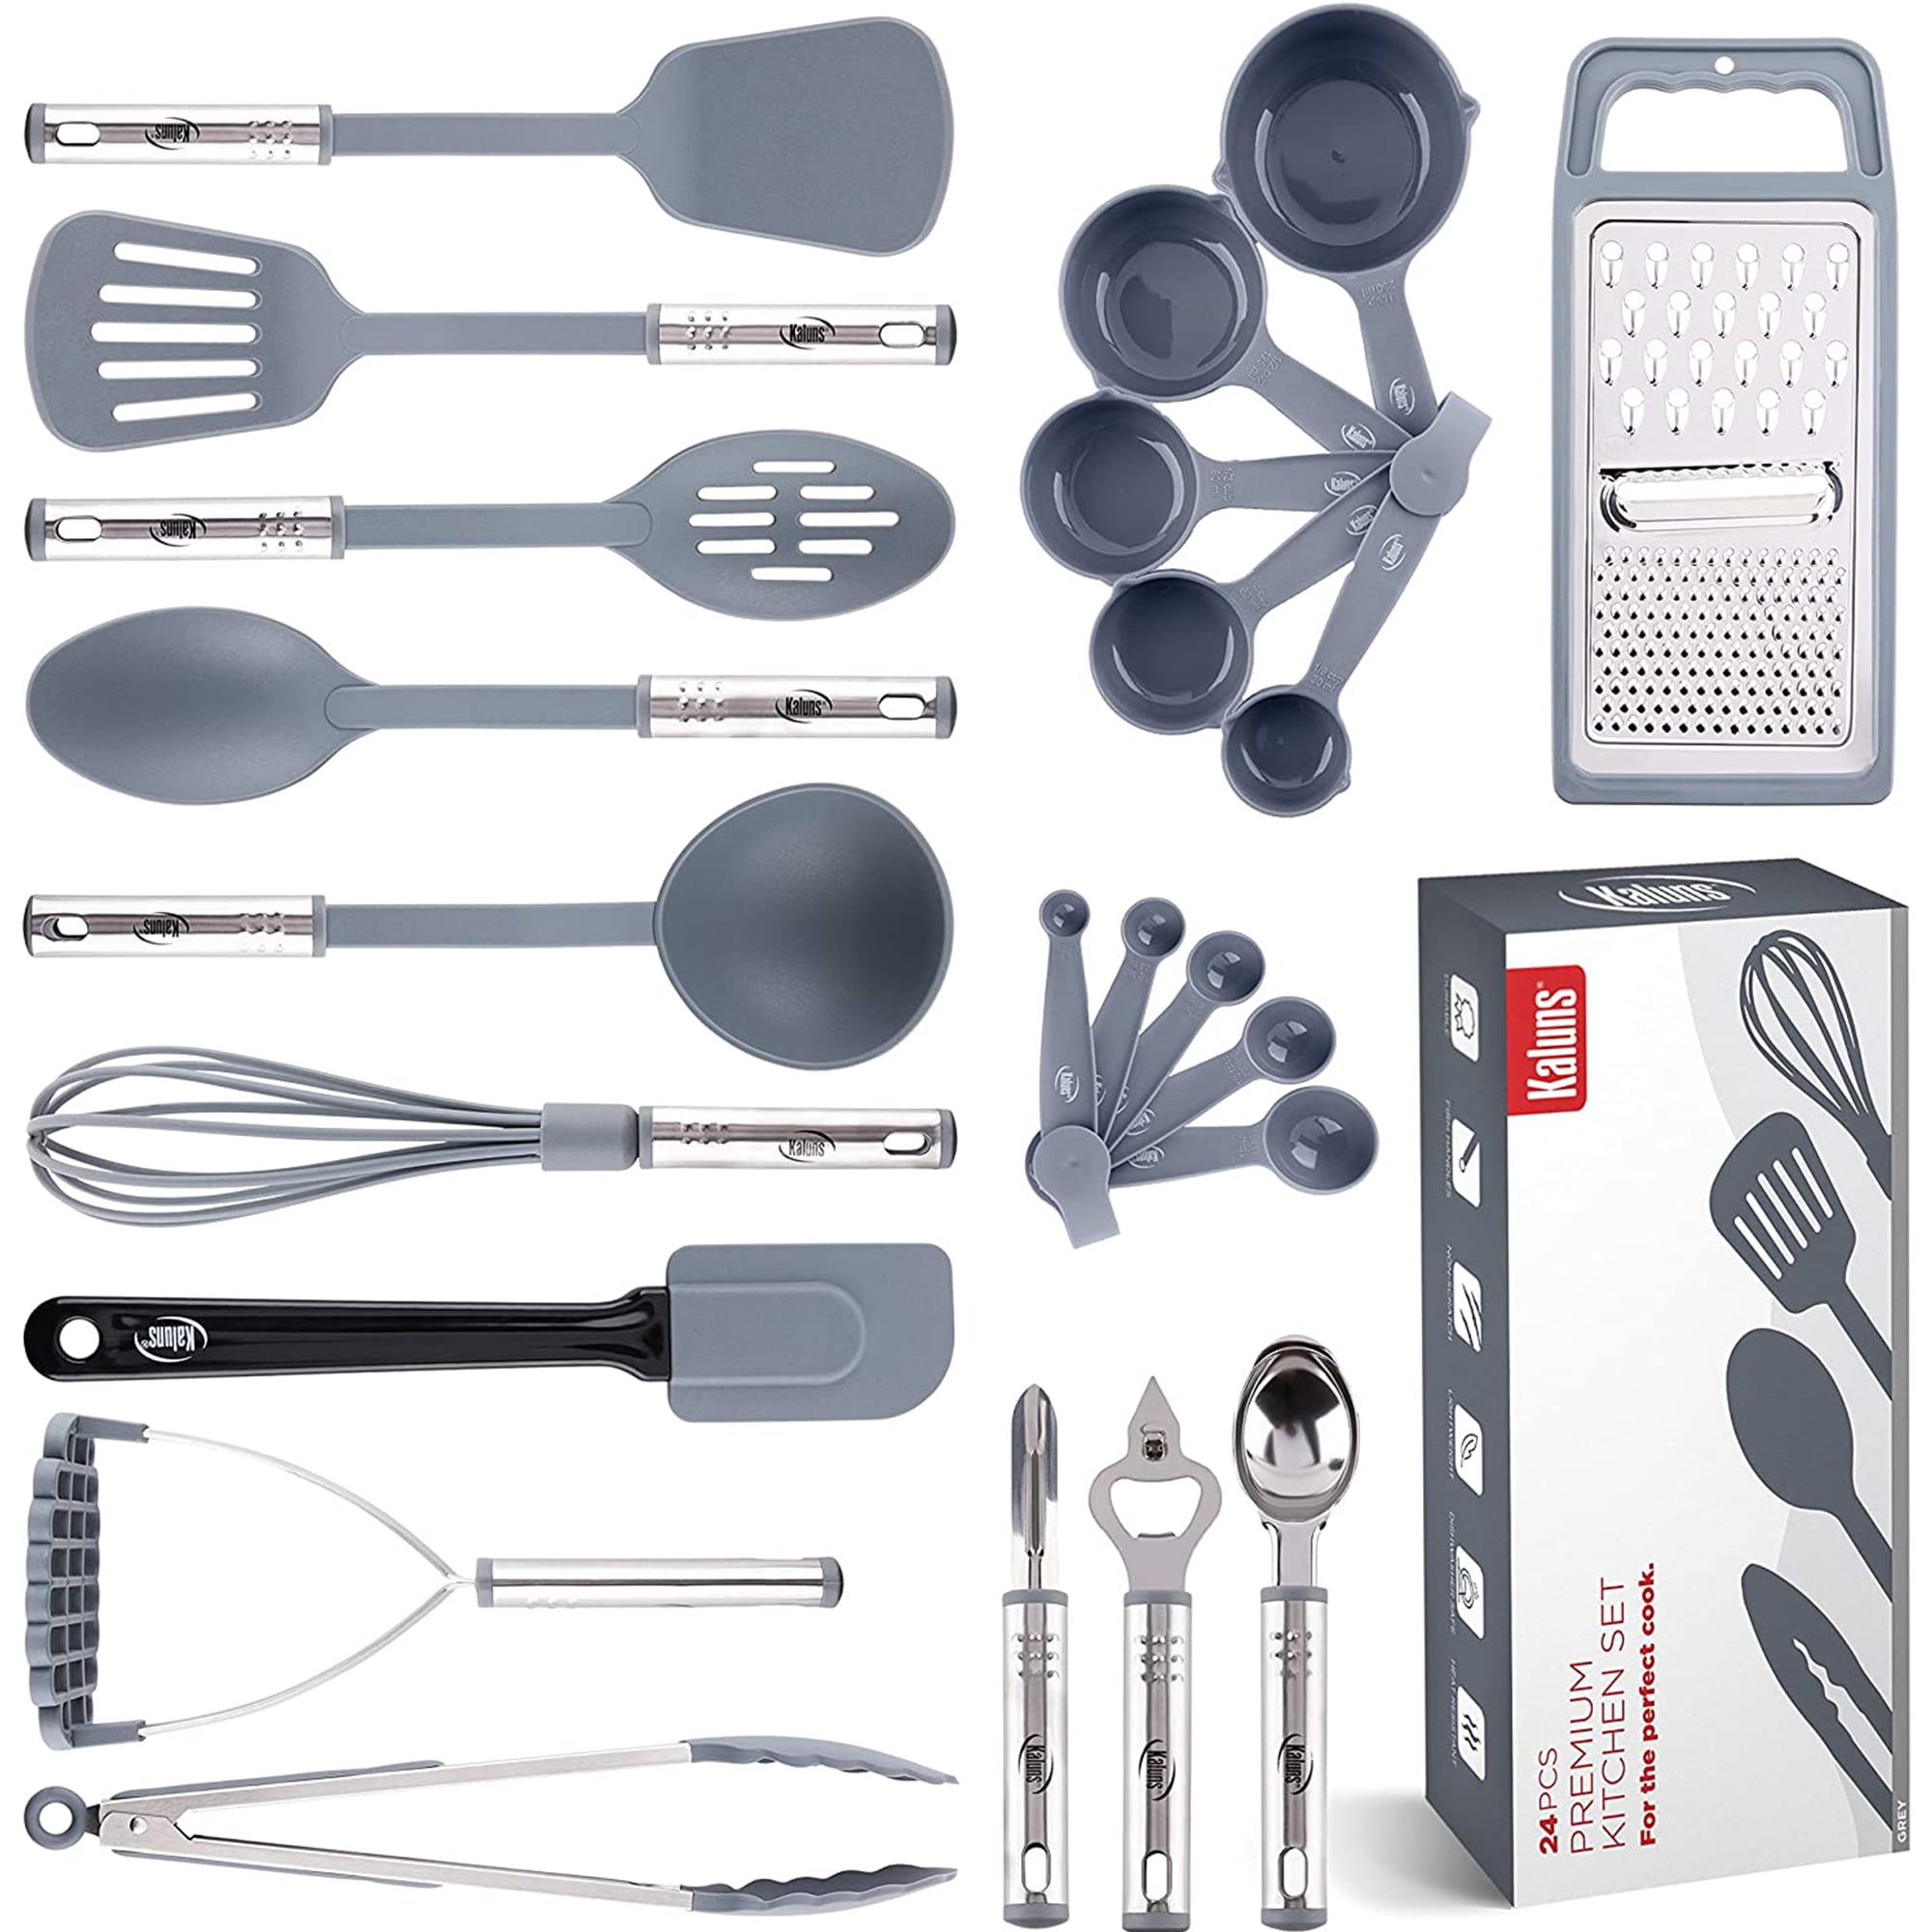 Kaluns Kitchen Utensils Set, 24 Piece Silicone Cooking Utensils, Dishwasher Safe and Heat Resistant Kitchen Tools, Gray